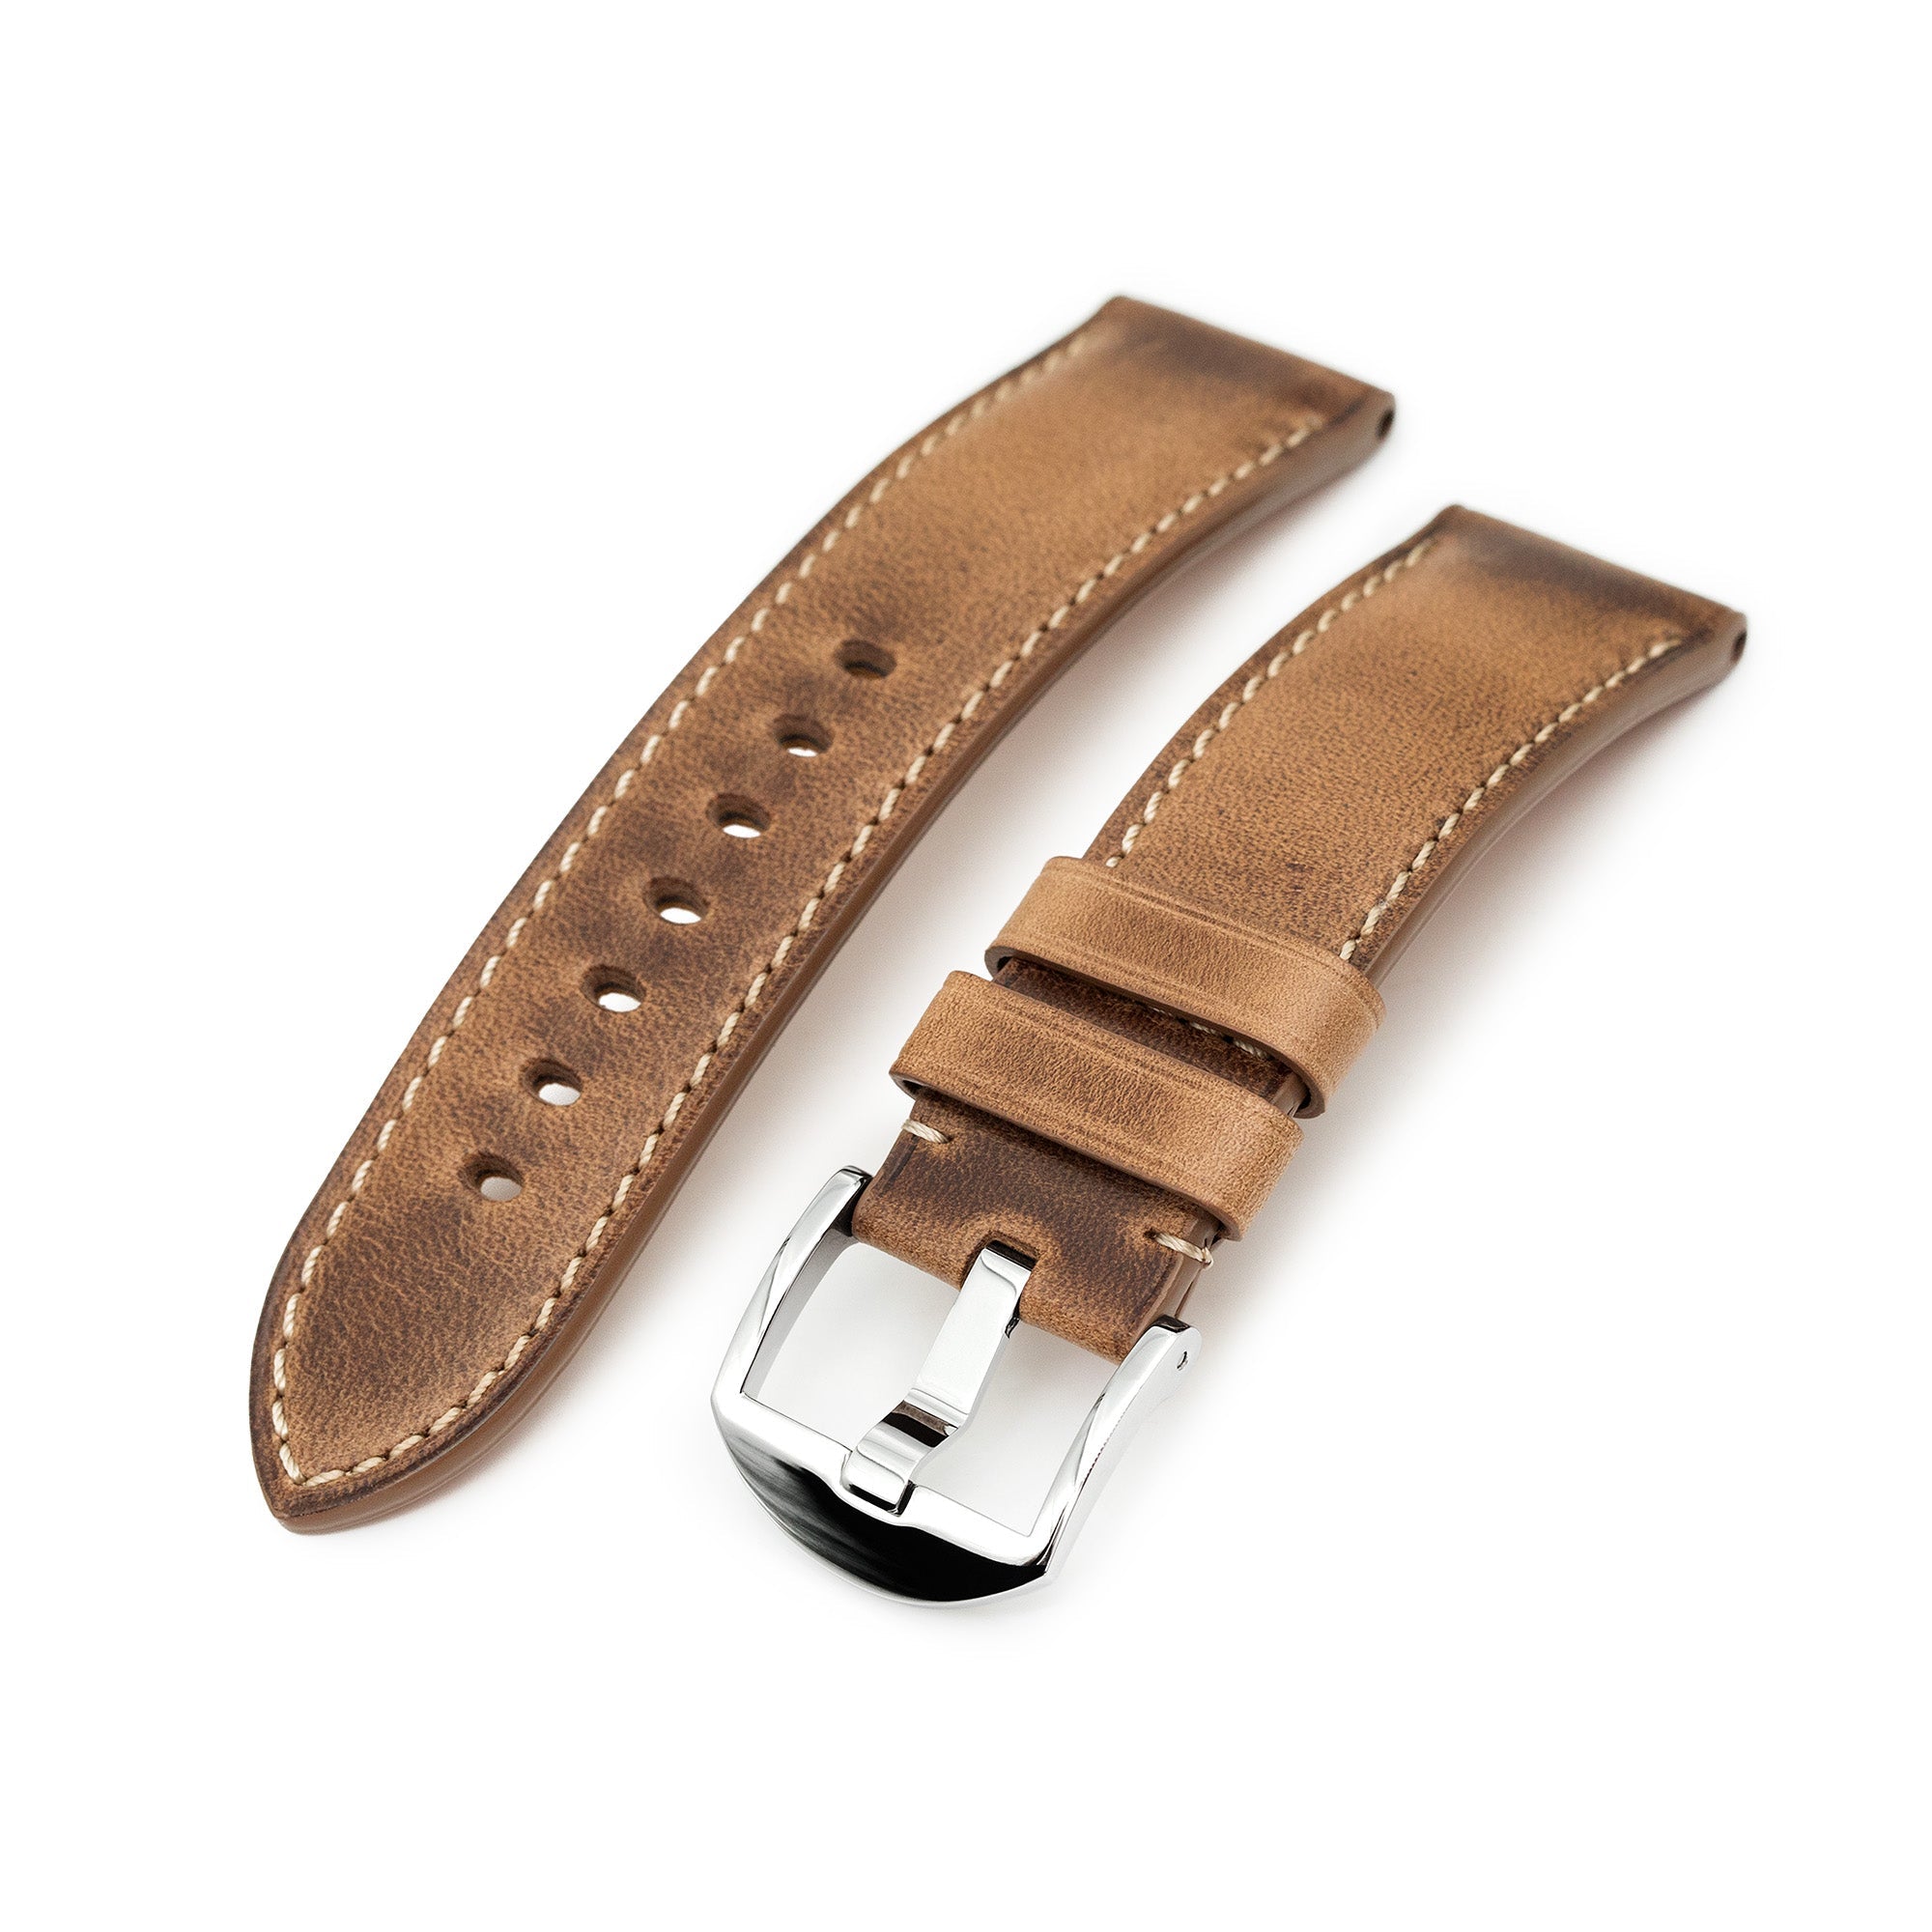 Pam Collection, Vintage Brown Horween Chromexcel Leather Watch Strap for Panerai, Beige Stitching Strapcode watch bands